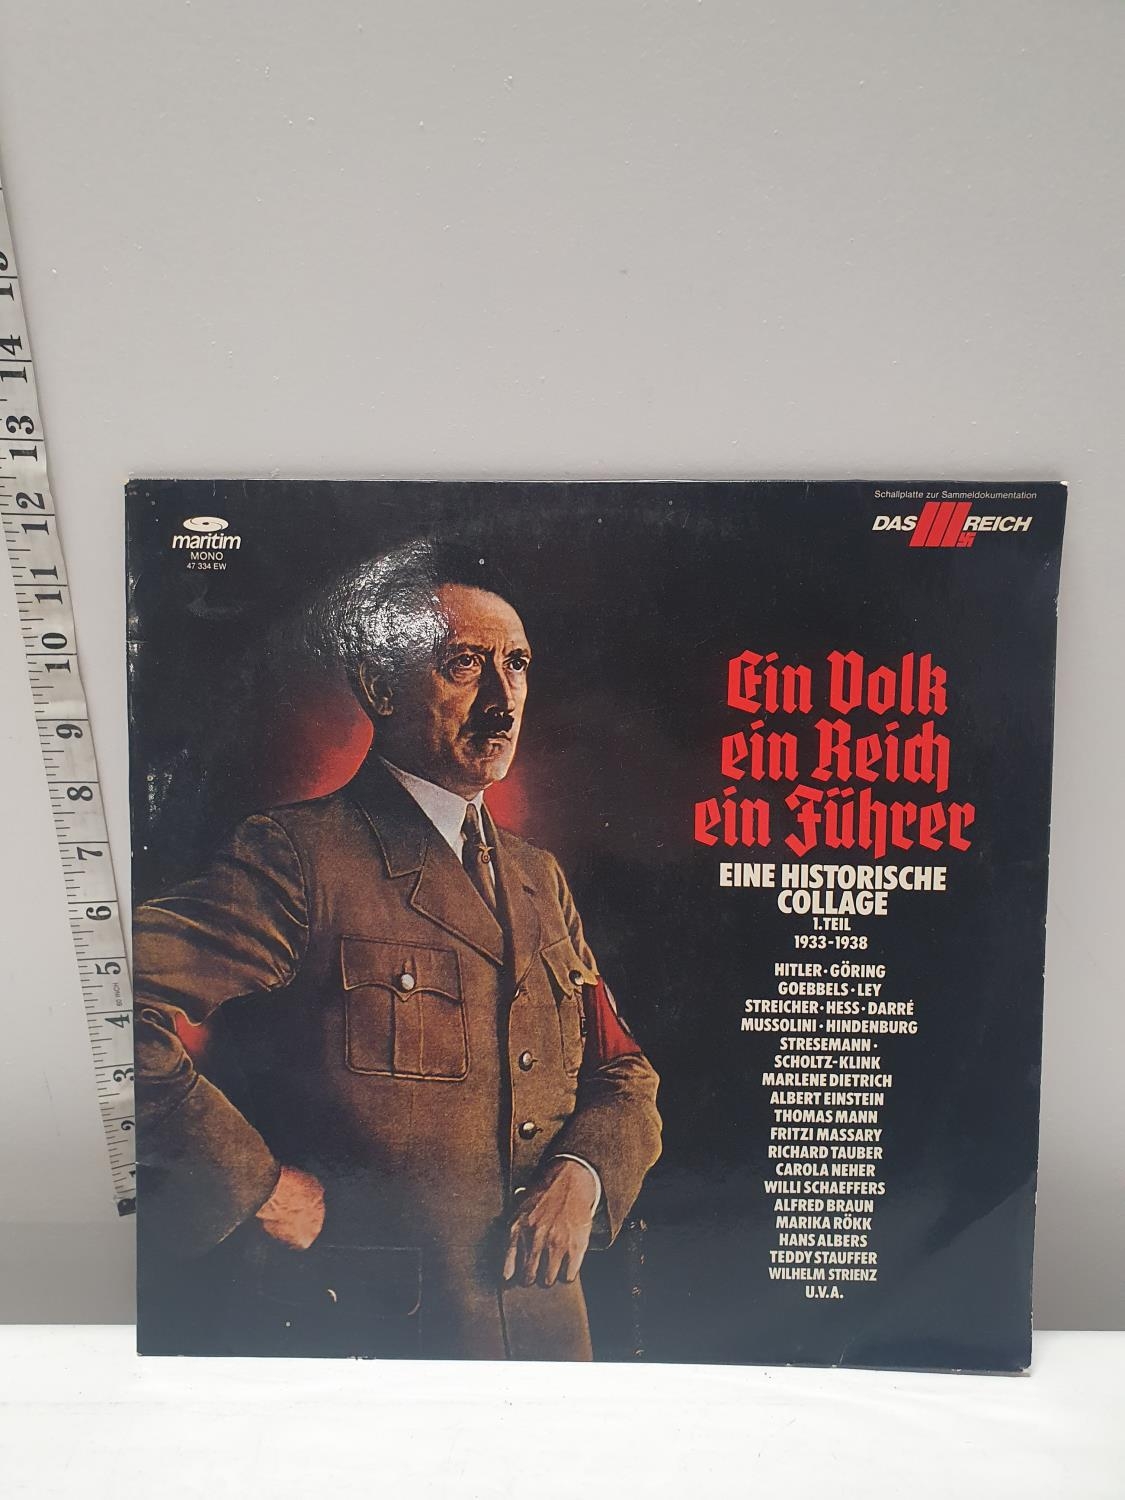 An LP vinyl compilation of Adolf Hitlers speeches from 1933 to 1938